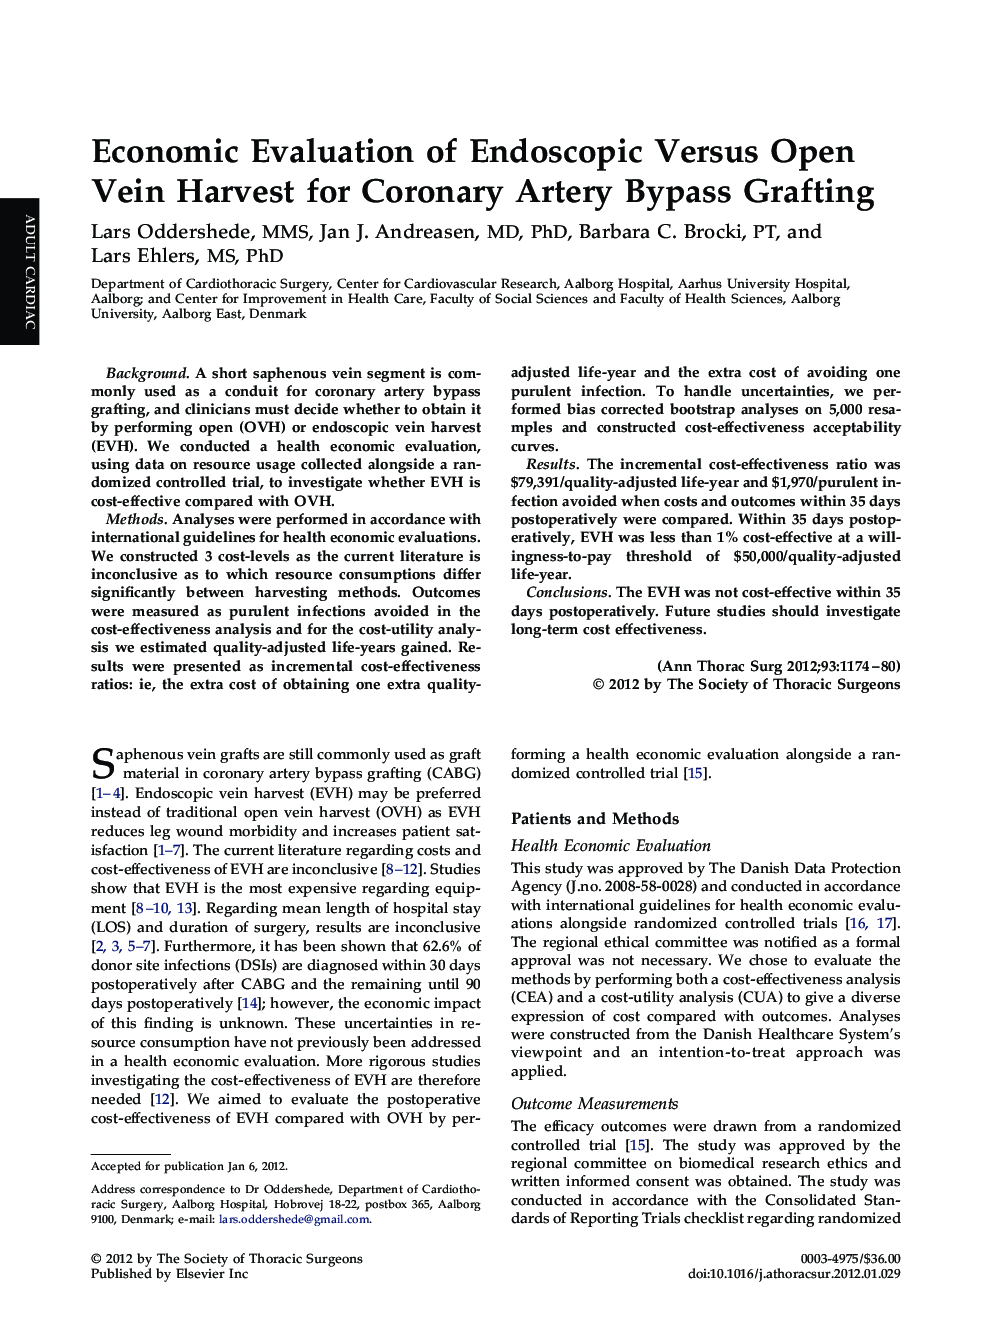 Economic Evaluation of Endoscopic Versus Open Vein Harvest for Coronary Artery Bypass Grafting